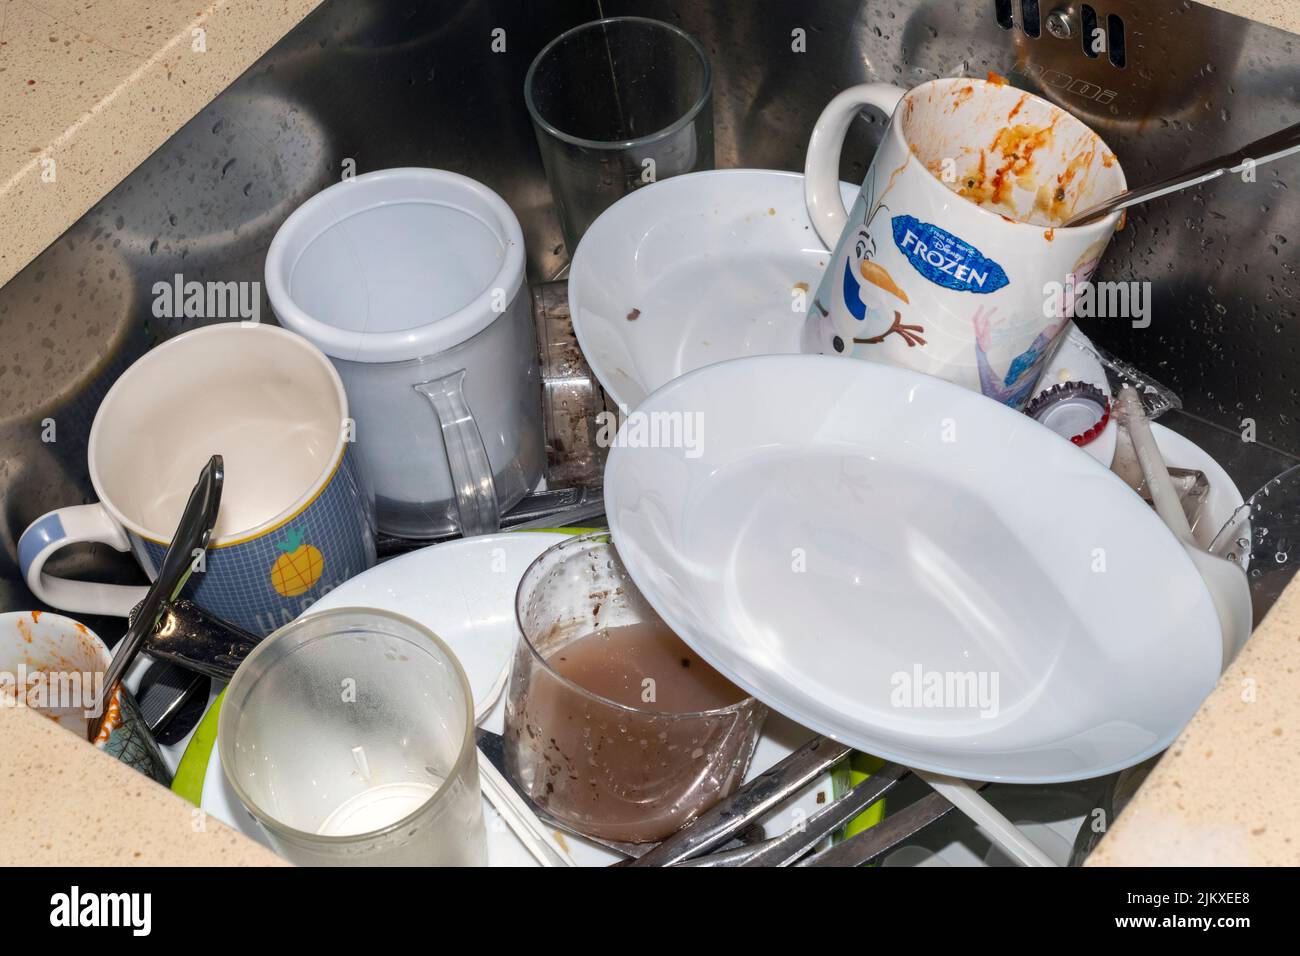 Kitchen dirty dishes, family living activities. Frozen cup. Kitchen commodities. Home living scenes. Kitchen mood or kitchen environment. Stock Photo